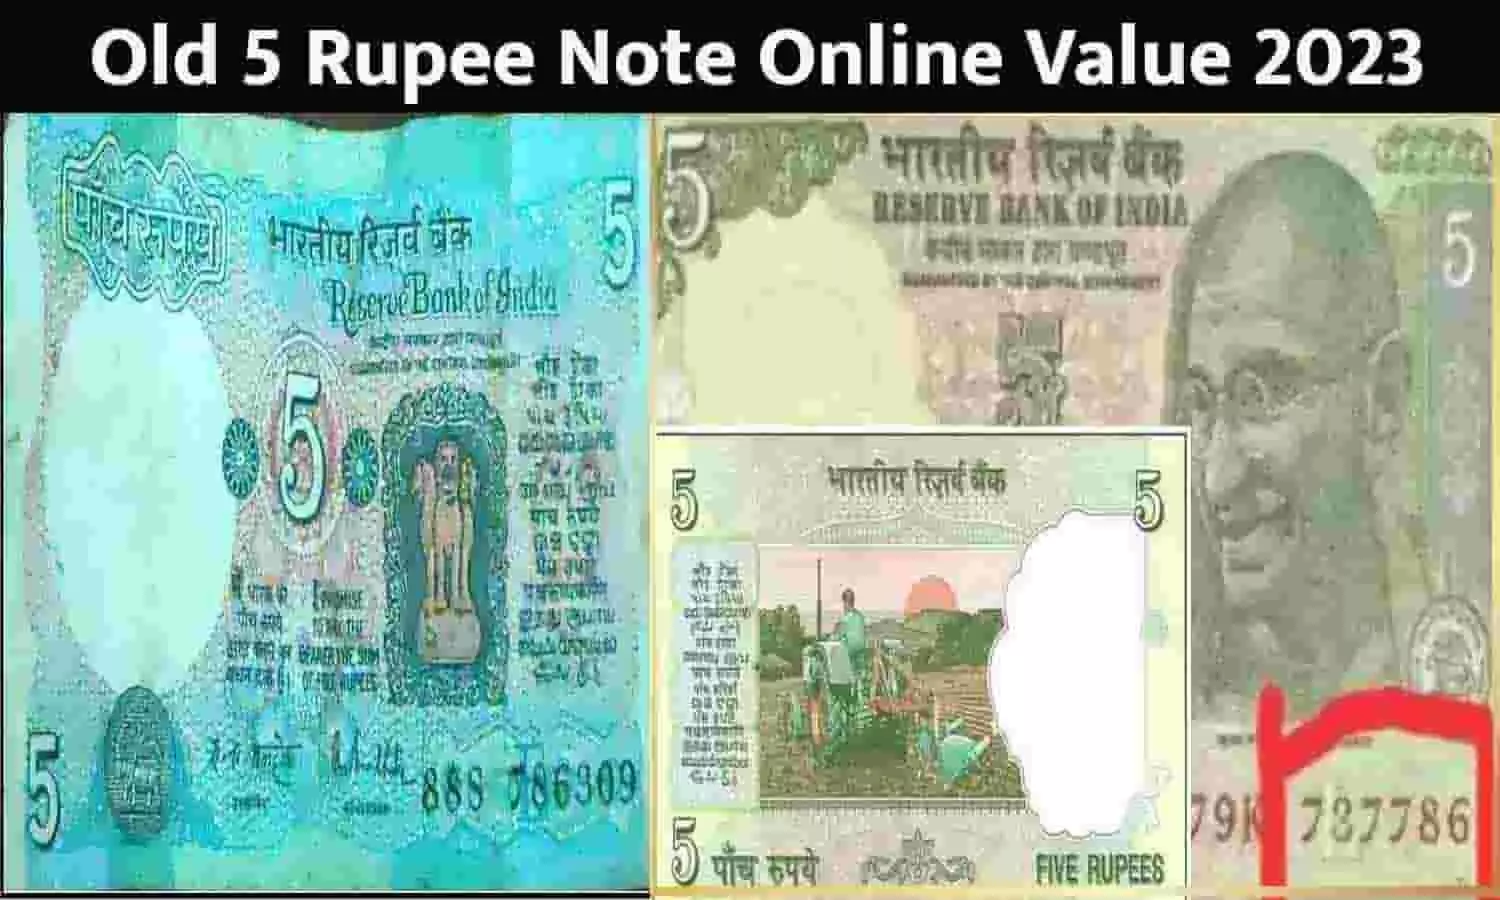 Old 5 Rupee Note Online Value